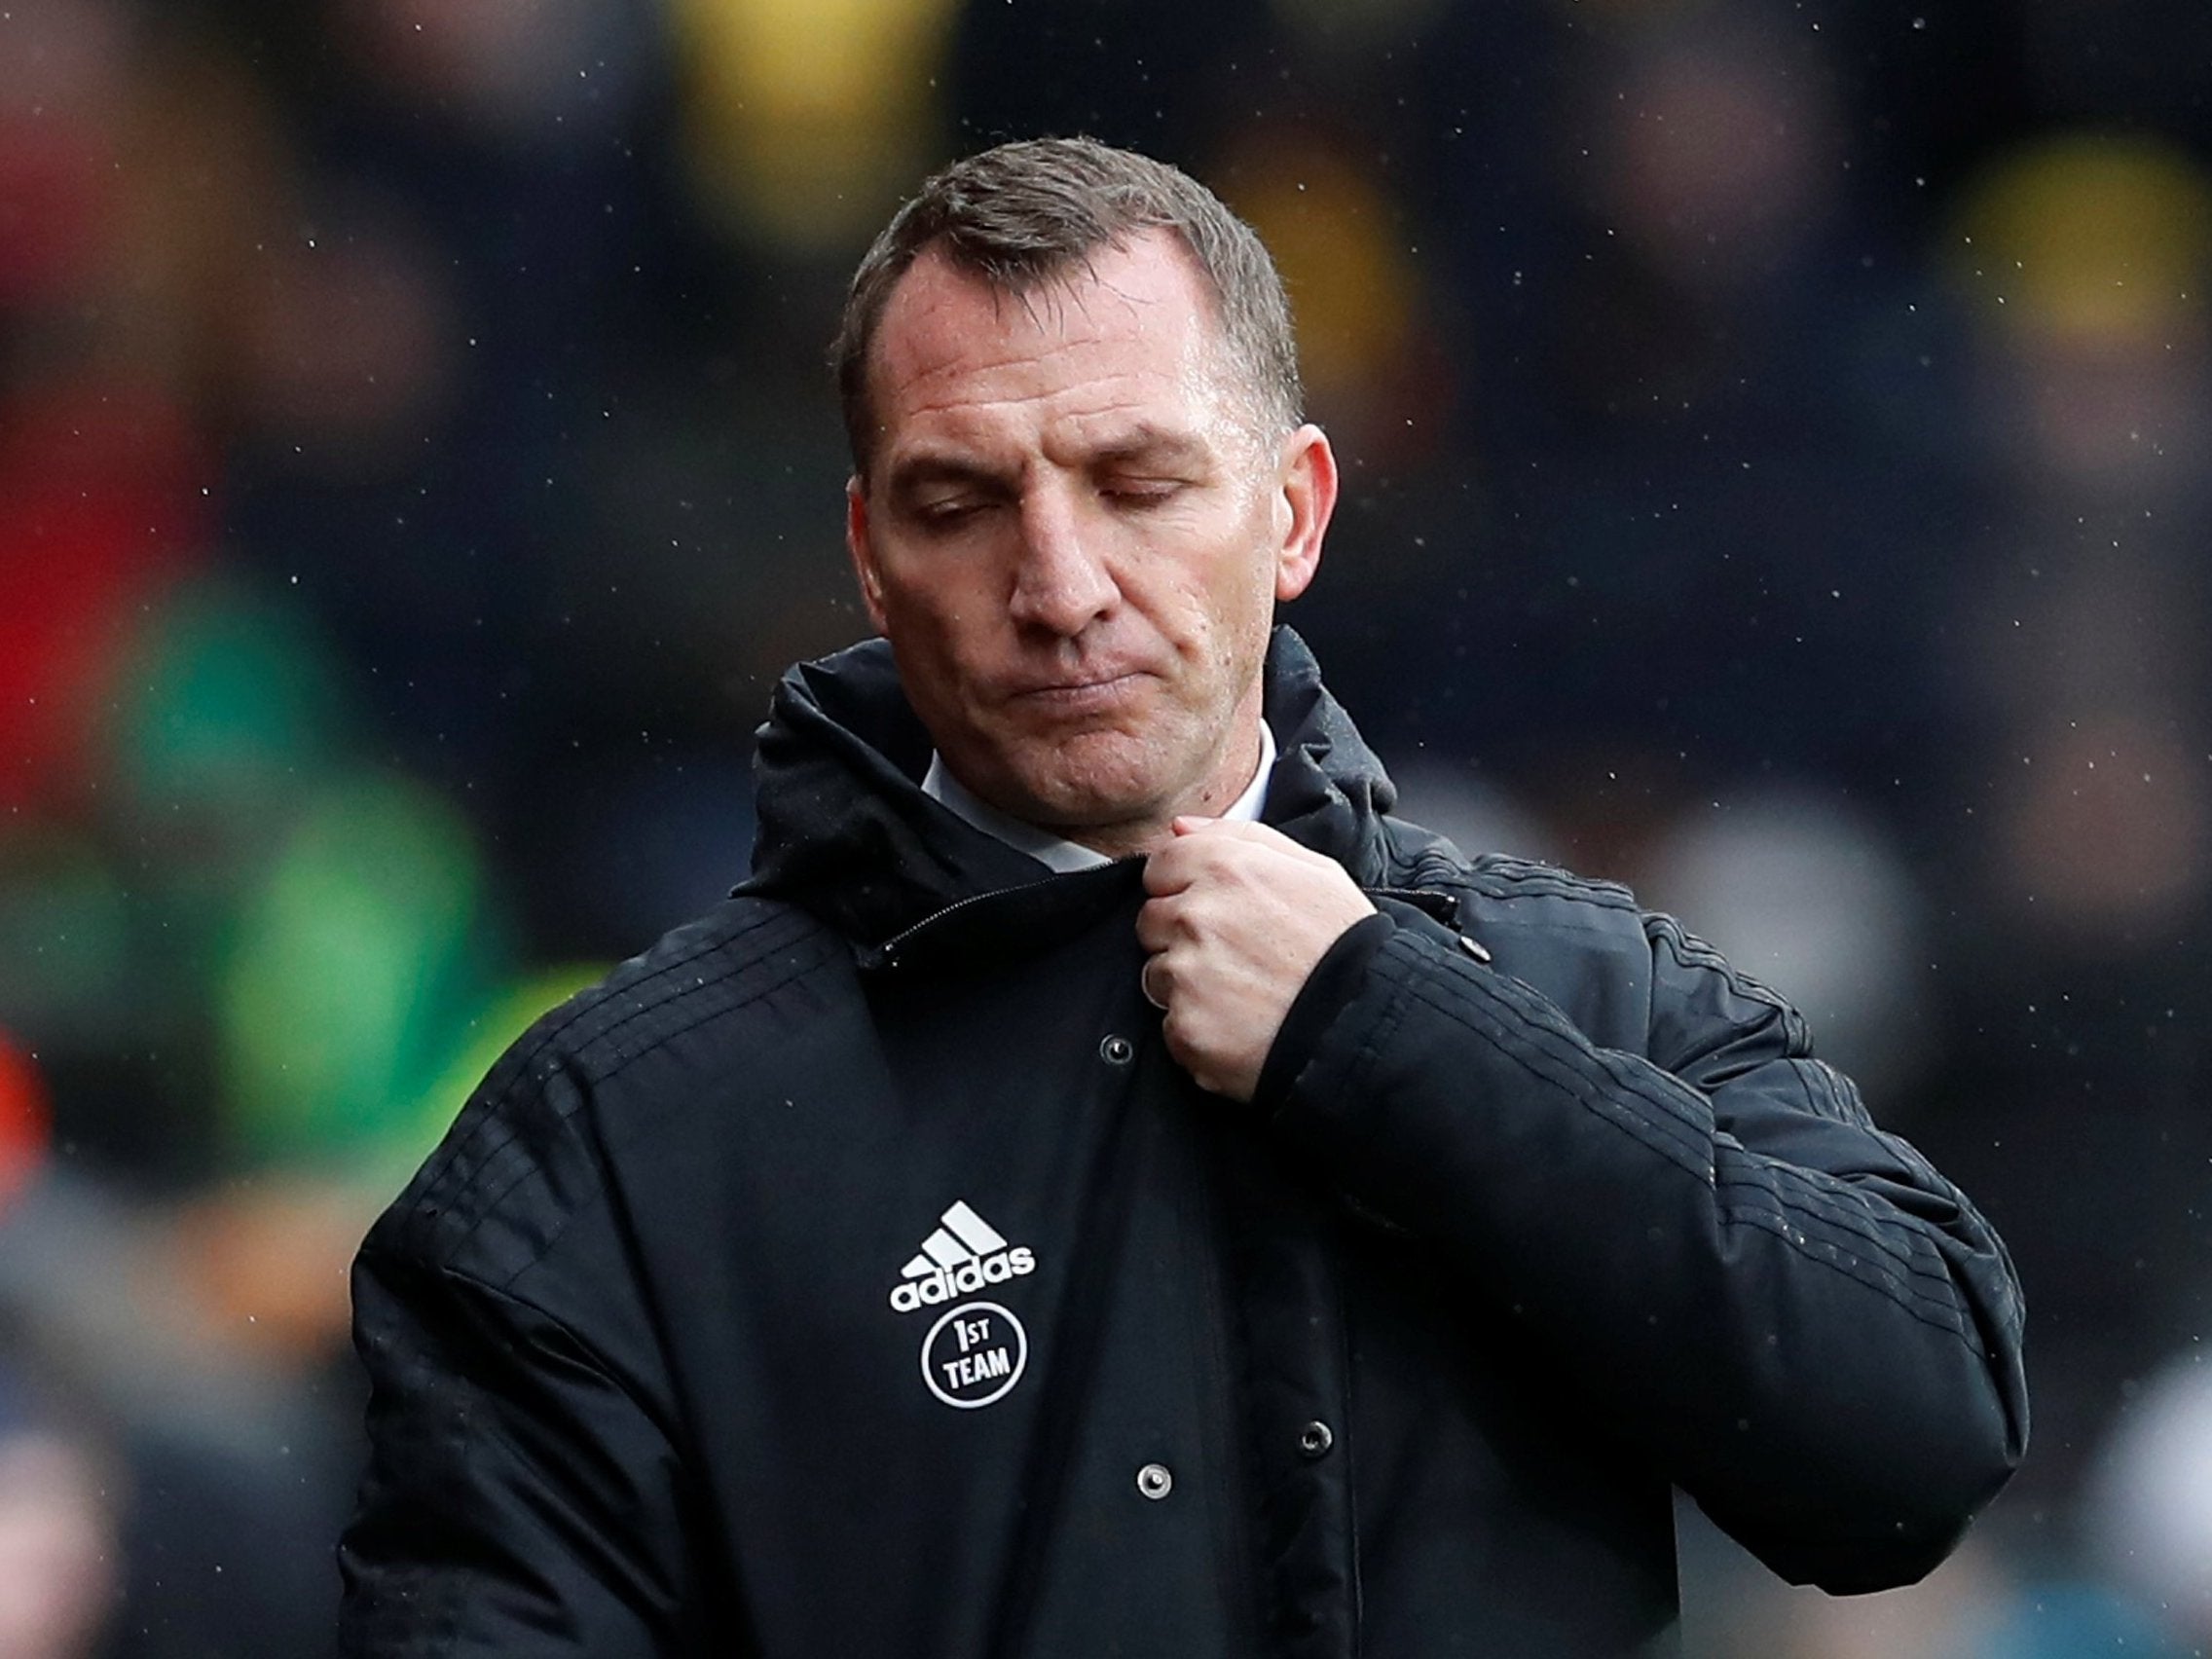 Brendan Rodgers reveals burglars stole all his Celtic medals as he moves family to Leicester earlier than planned | The Independent | The Independent